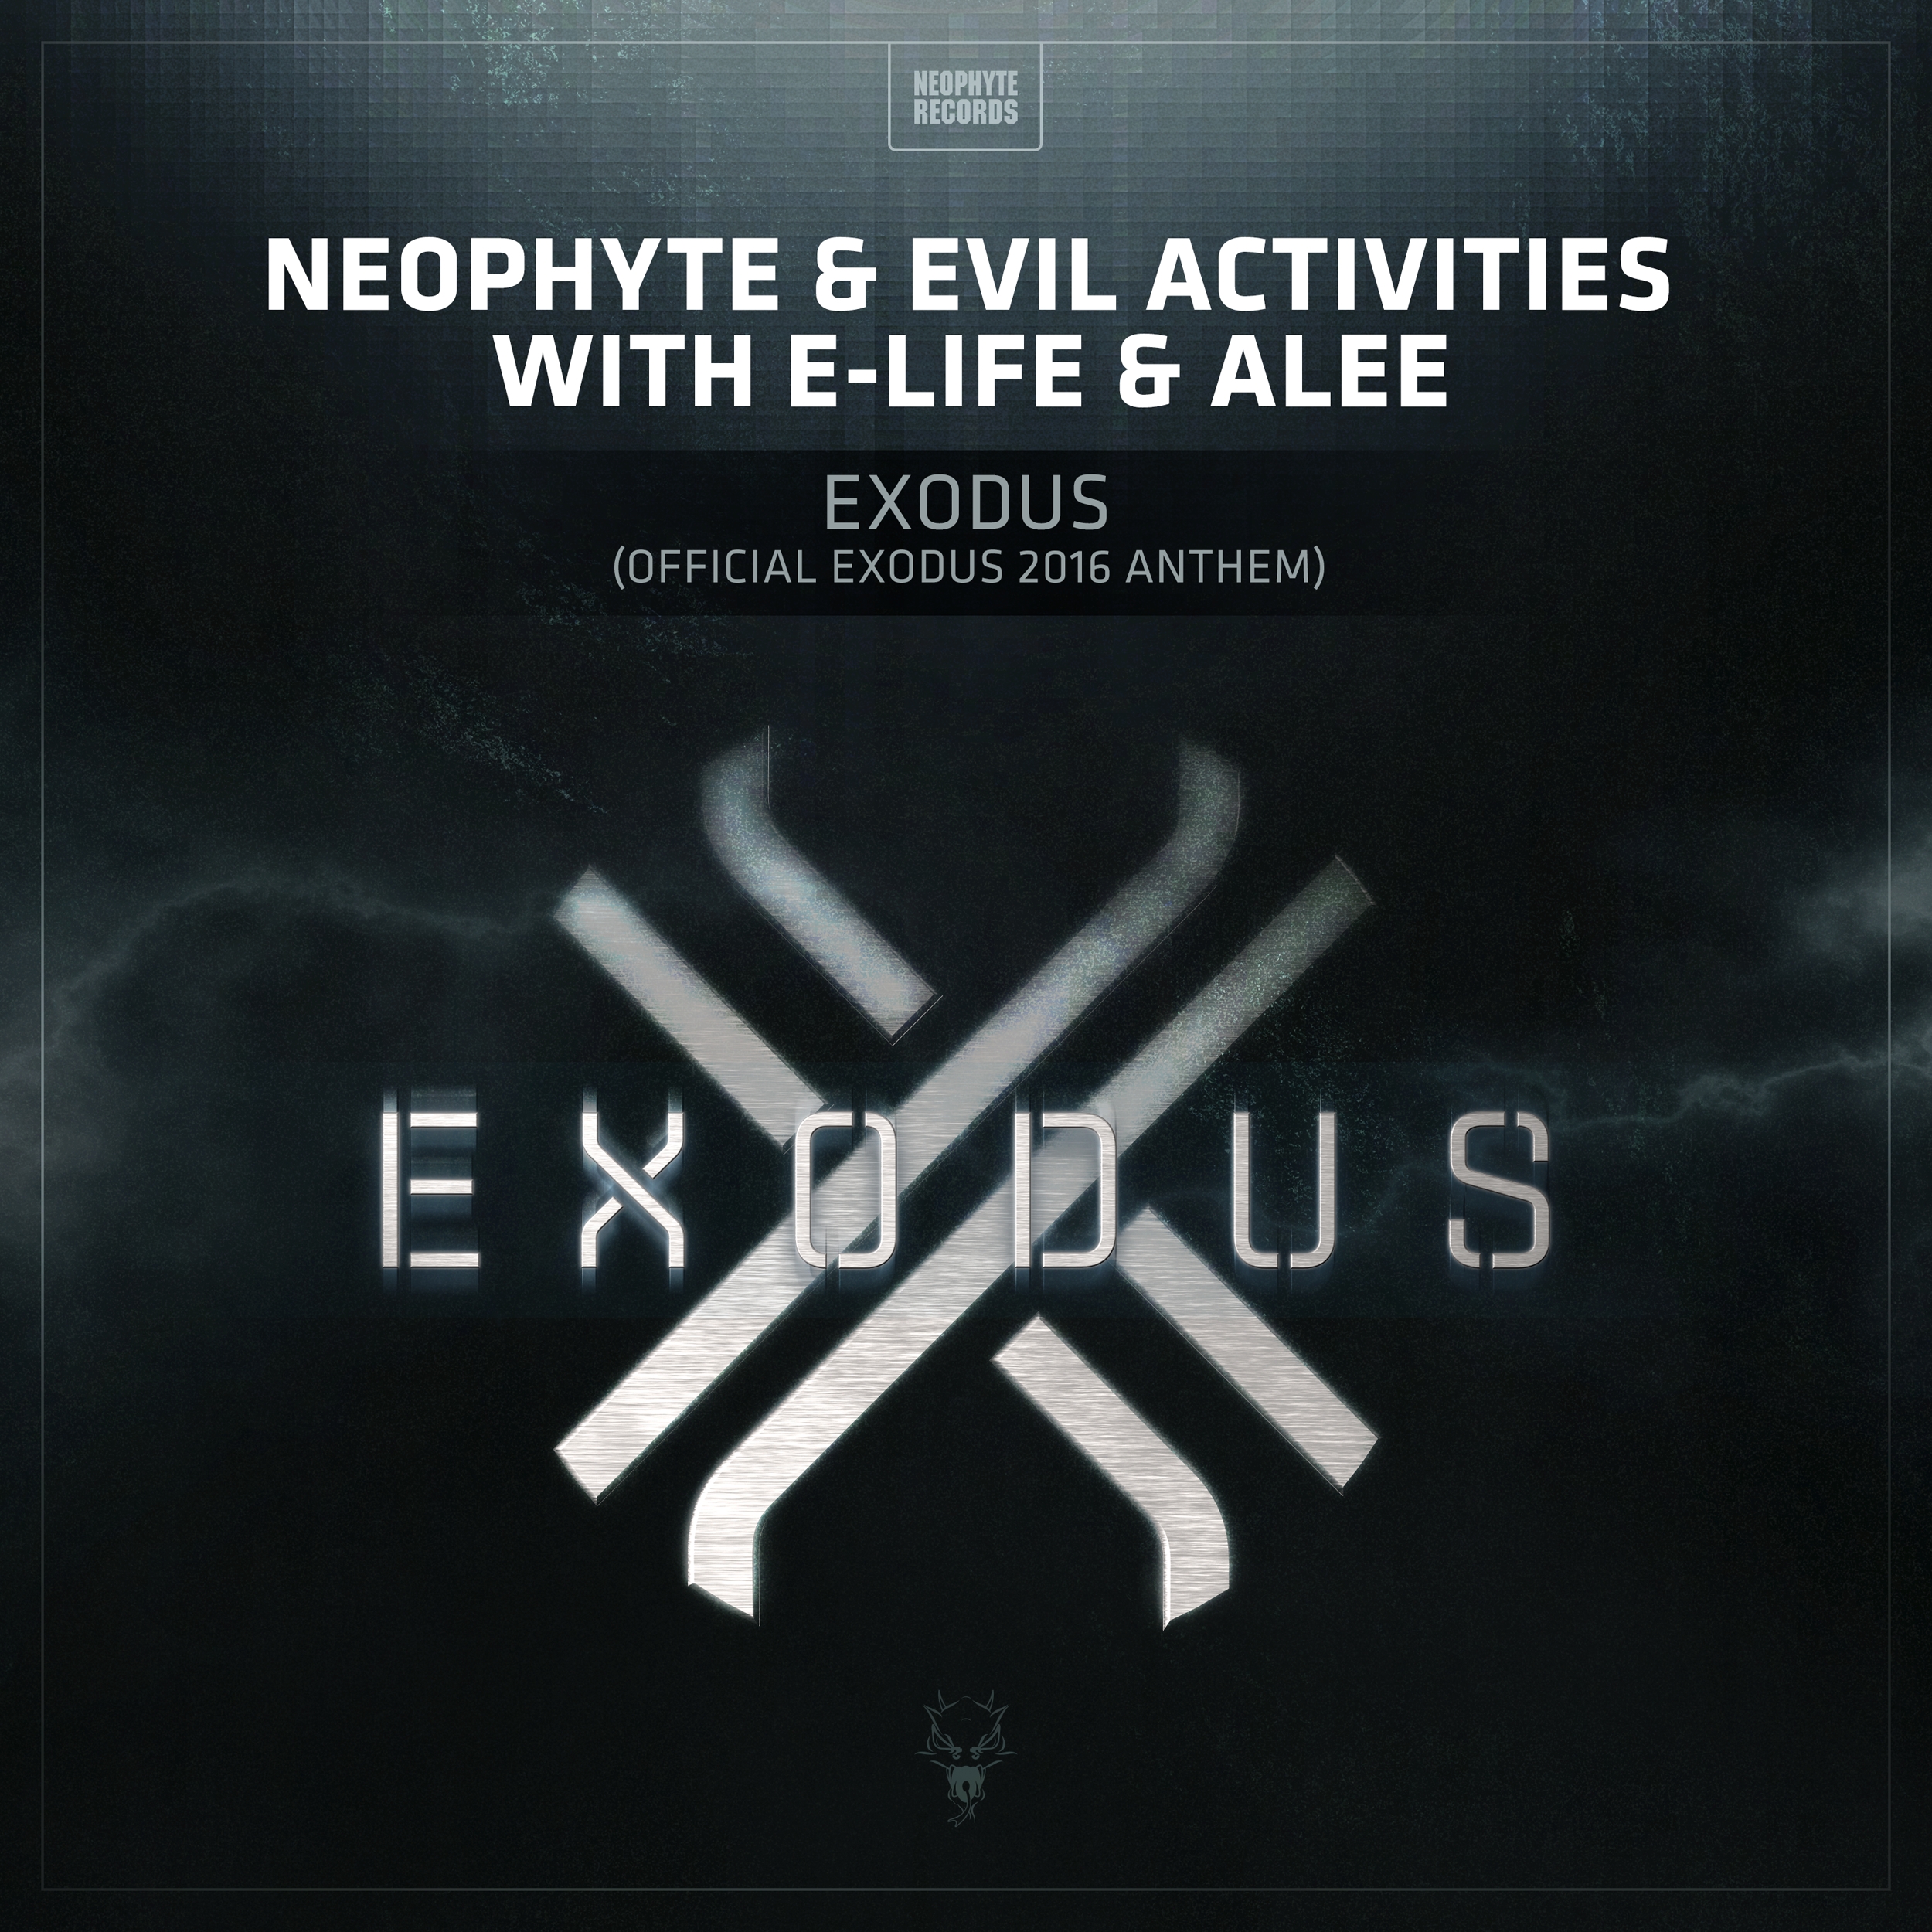  Neophyte & Evil Activities with E-Life & Alee - Exodus (Official Exodus 2016 Anthem) [NEOPHYTE RECORDS] Original